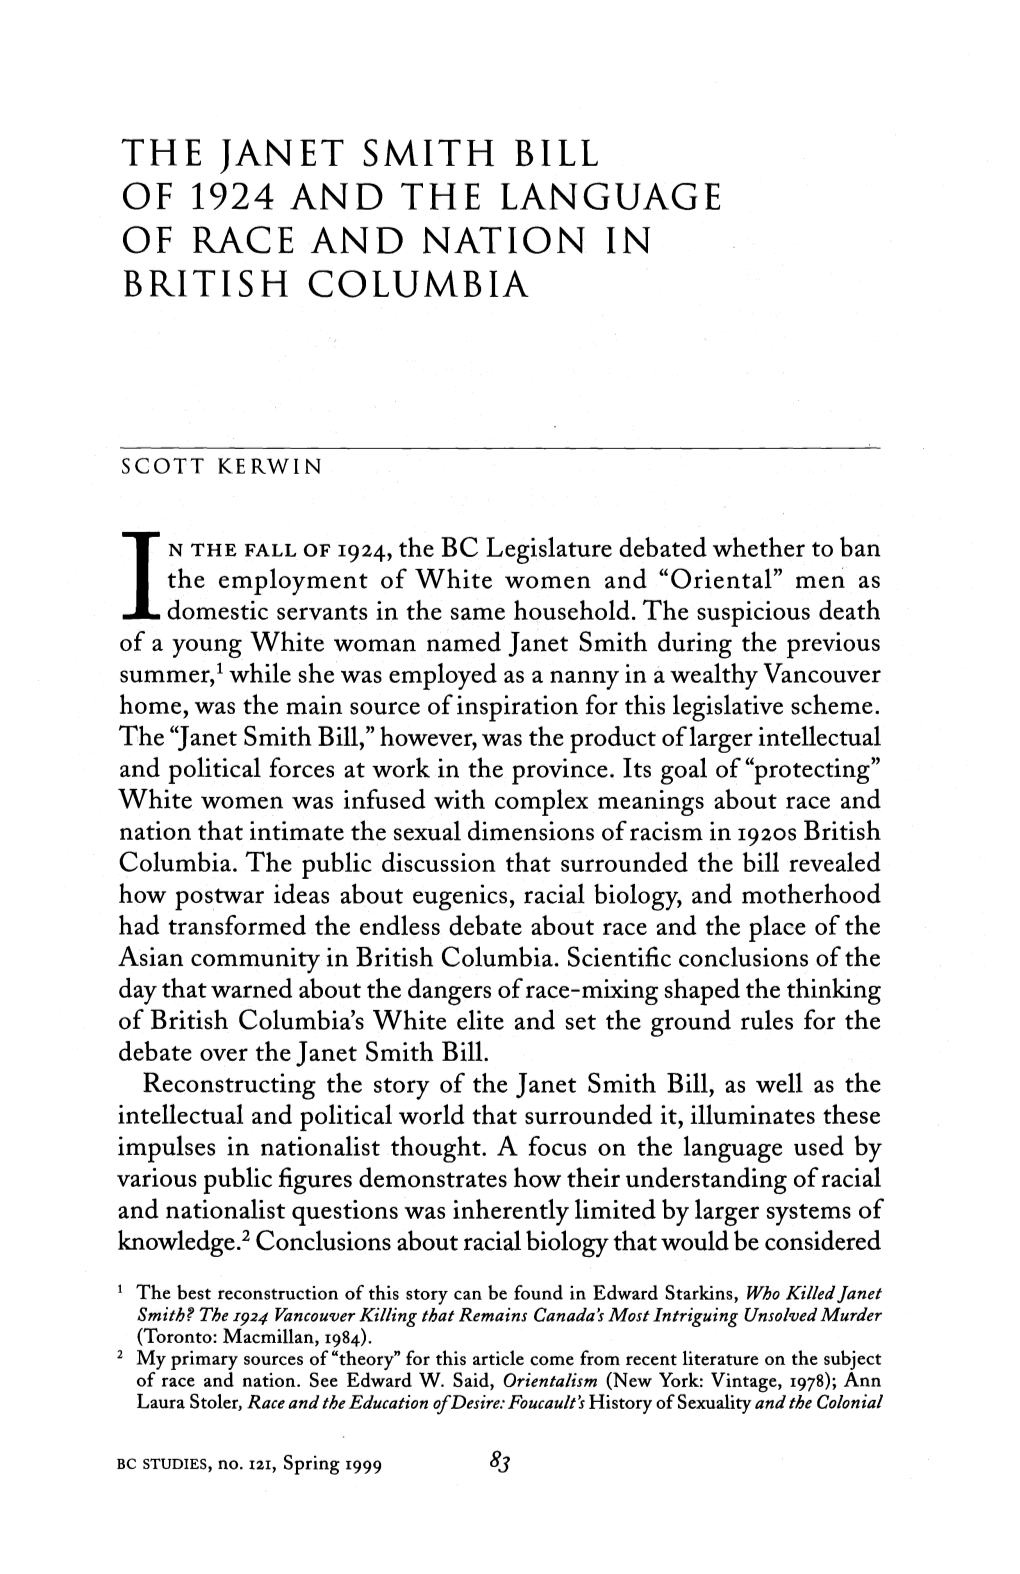 The Janet Smith Bill of 1924 and the Language of Race and Nation in British Columbia